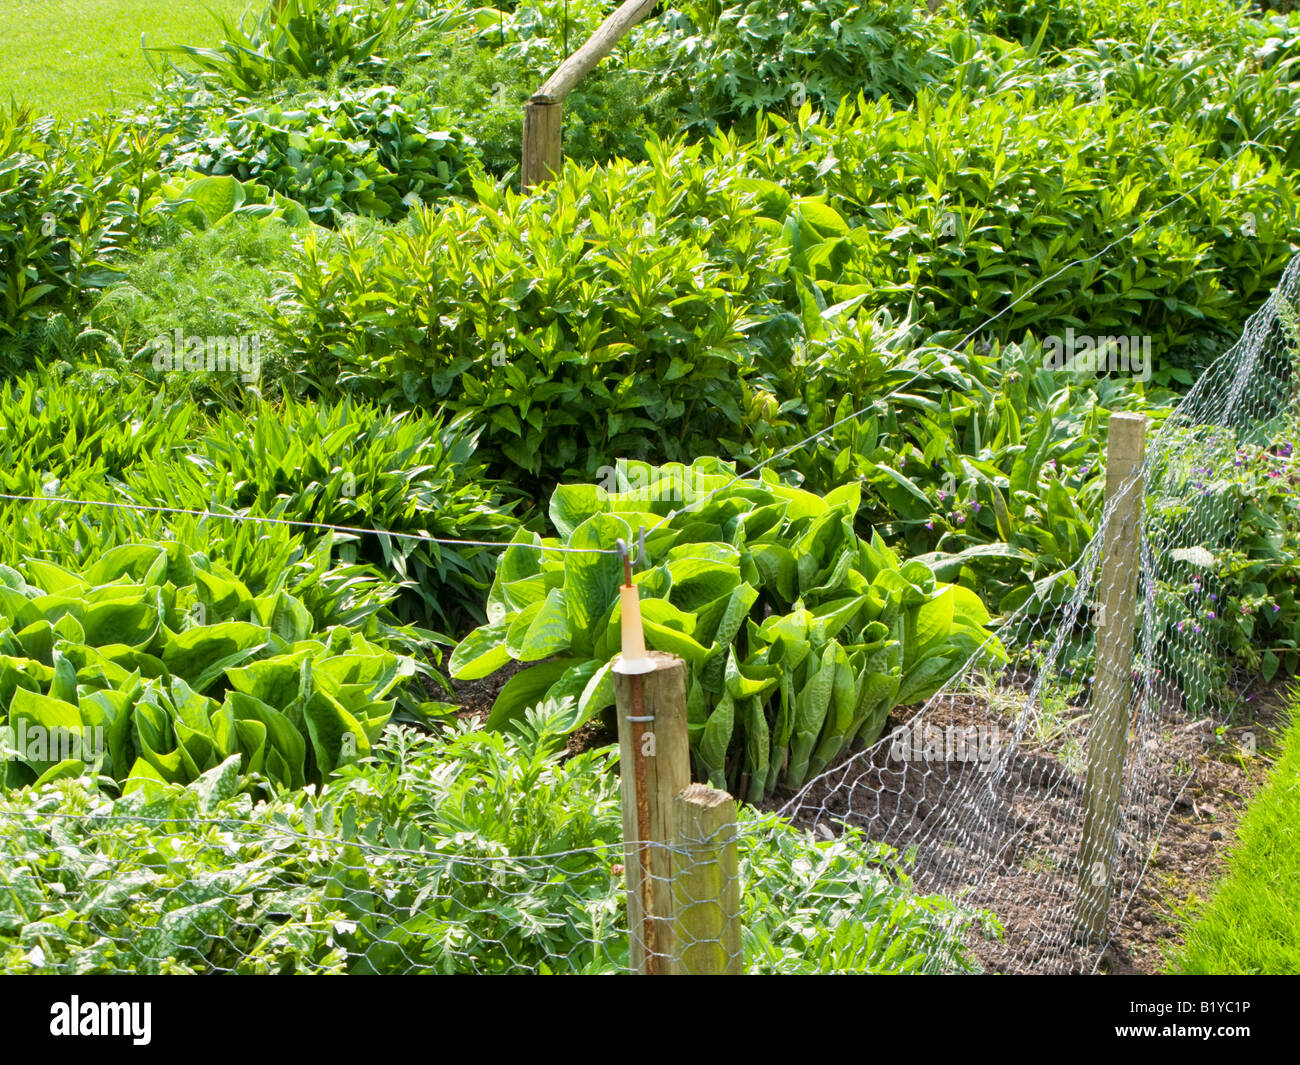 Electric fence around flower bed to prevent deer damage Stock Photo